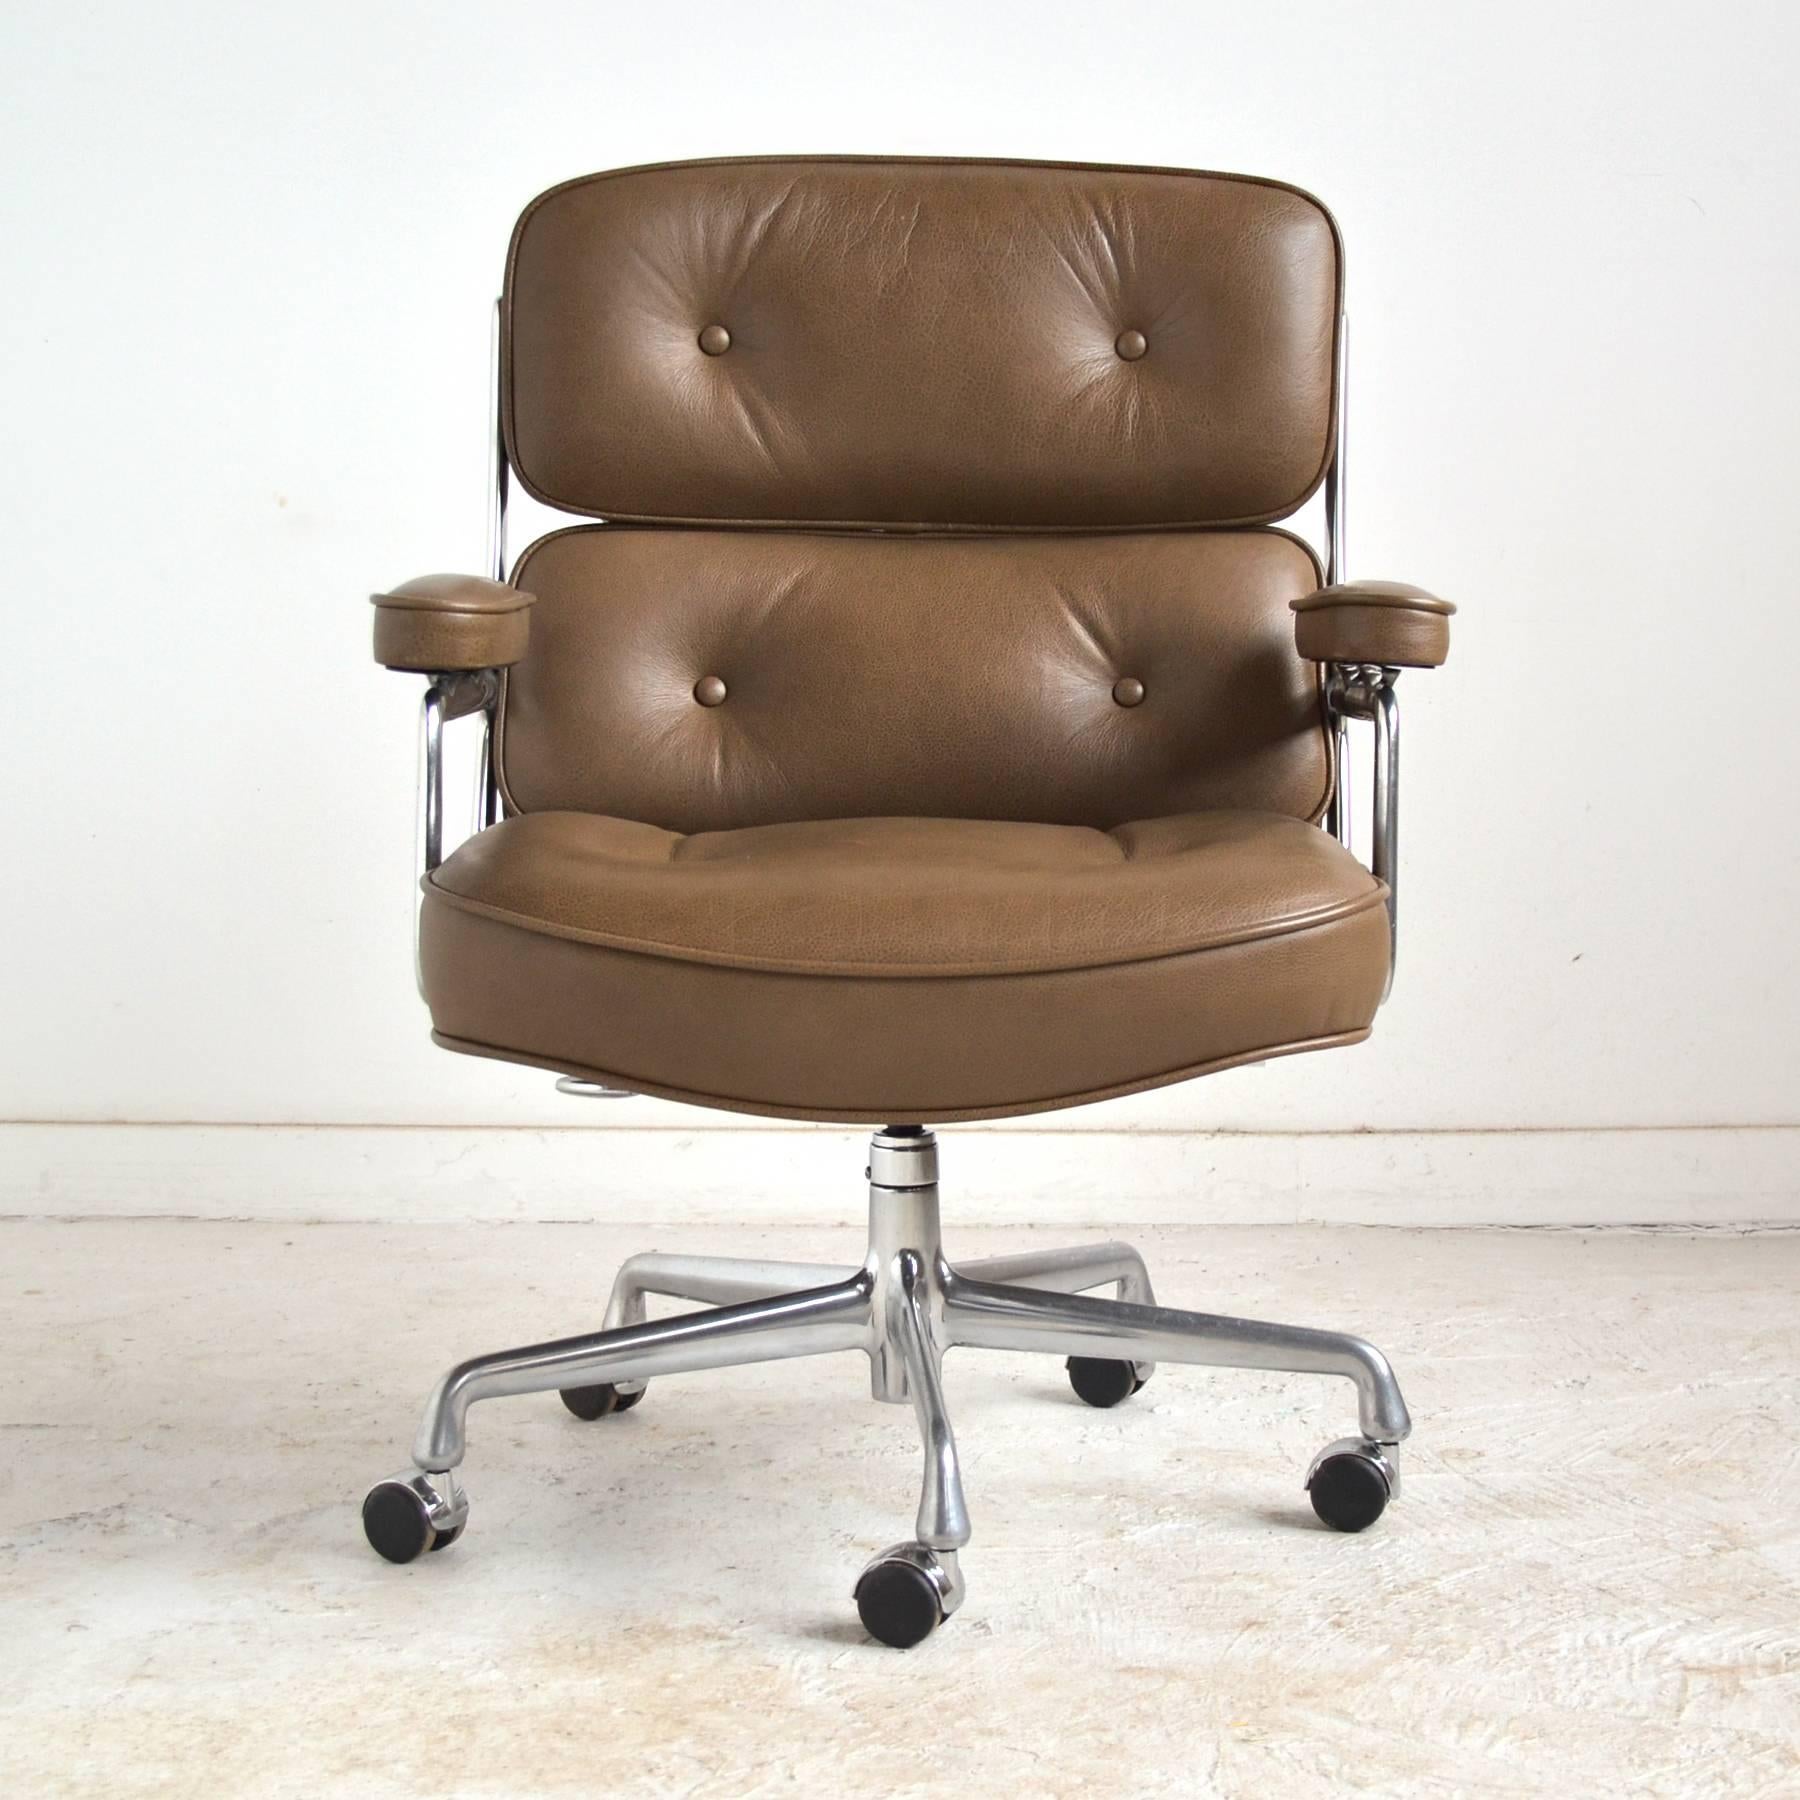 American Charles and Ray Eames Pair of Time-Life Chairs by Herman Miller